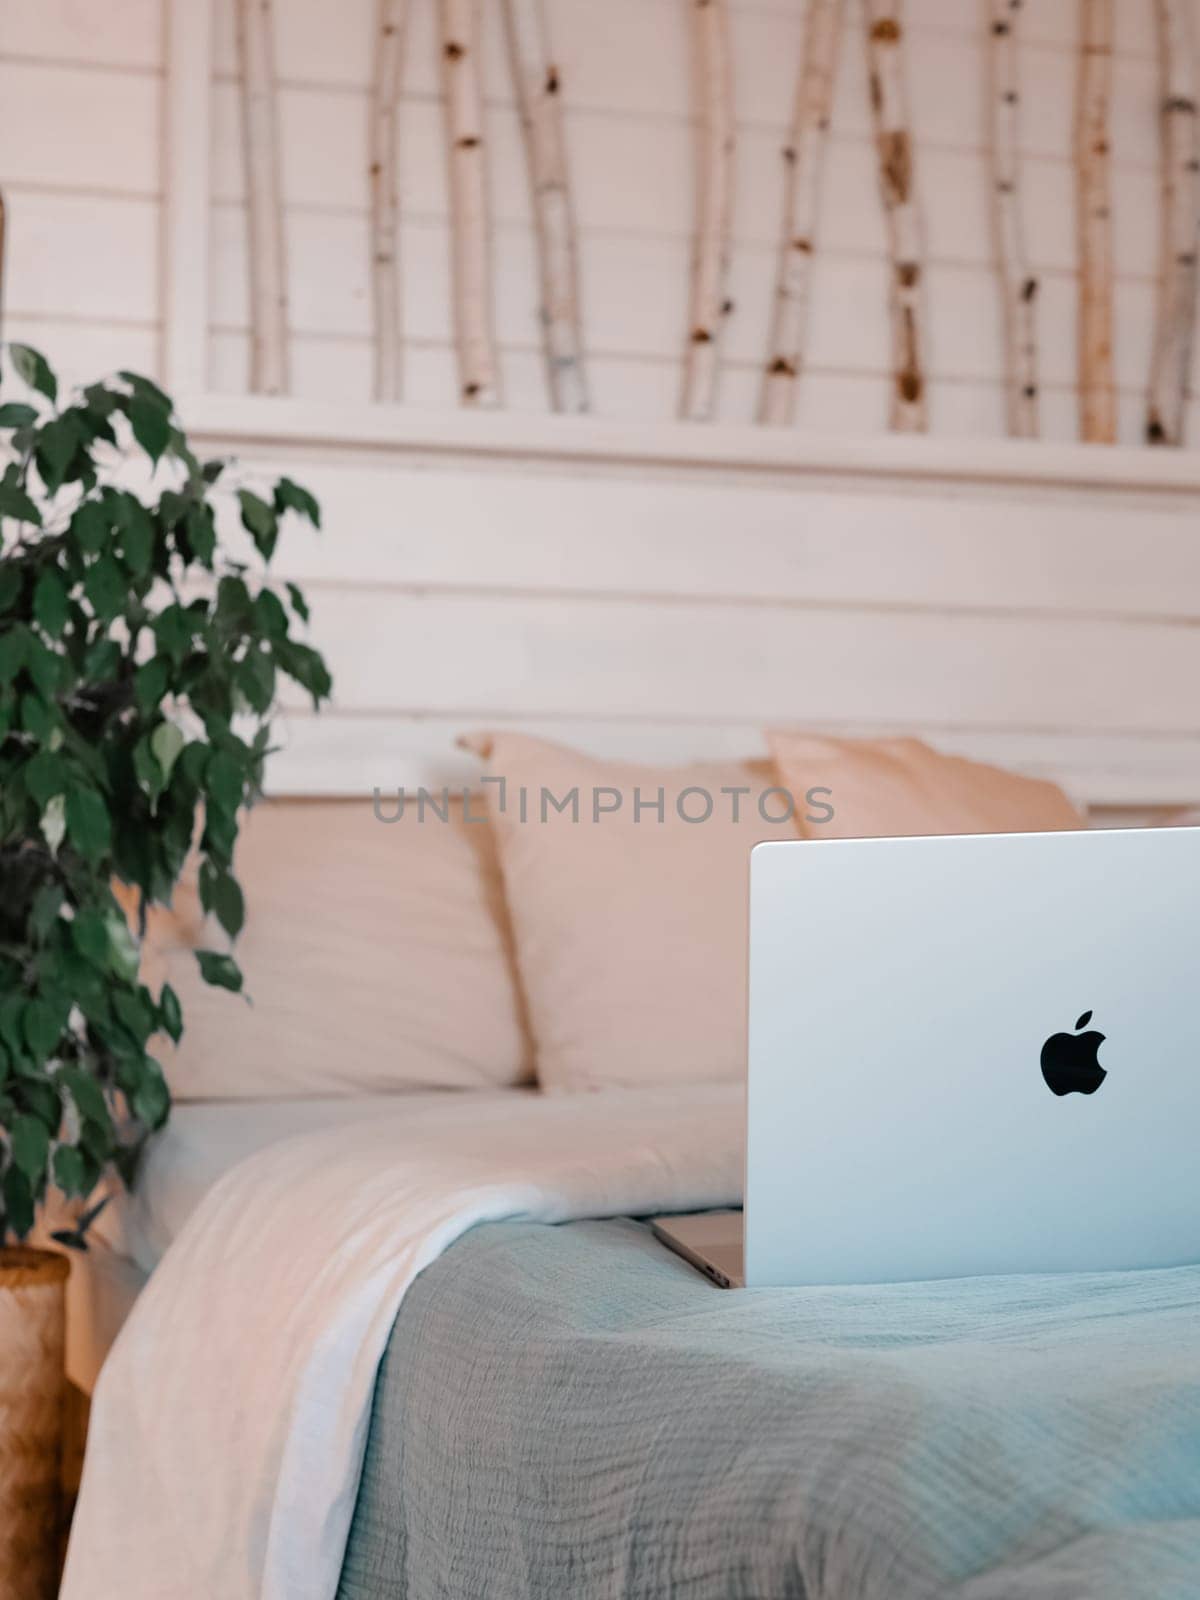 Macbook on bed in country house bedroom interior background. Silver aluminium laptop at bed near green waringin tree in scandinavian country house